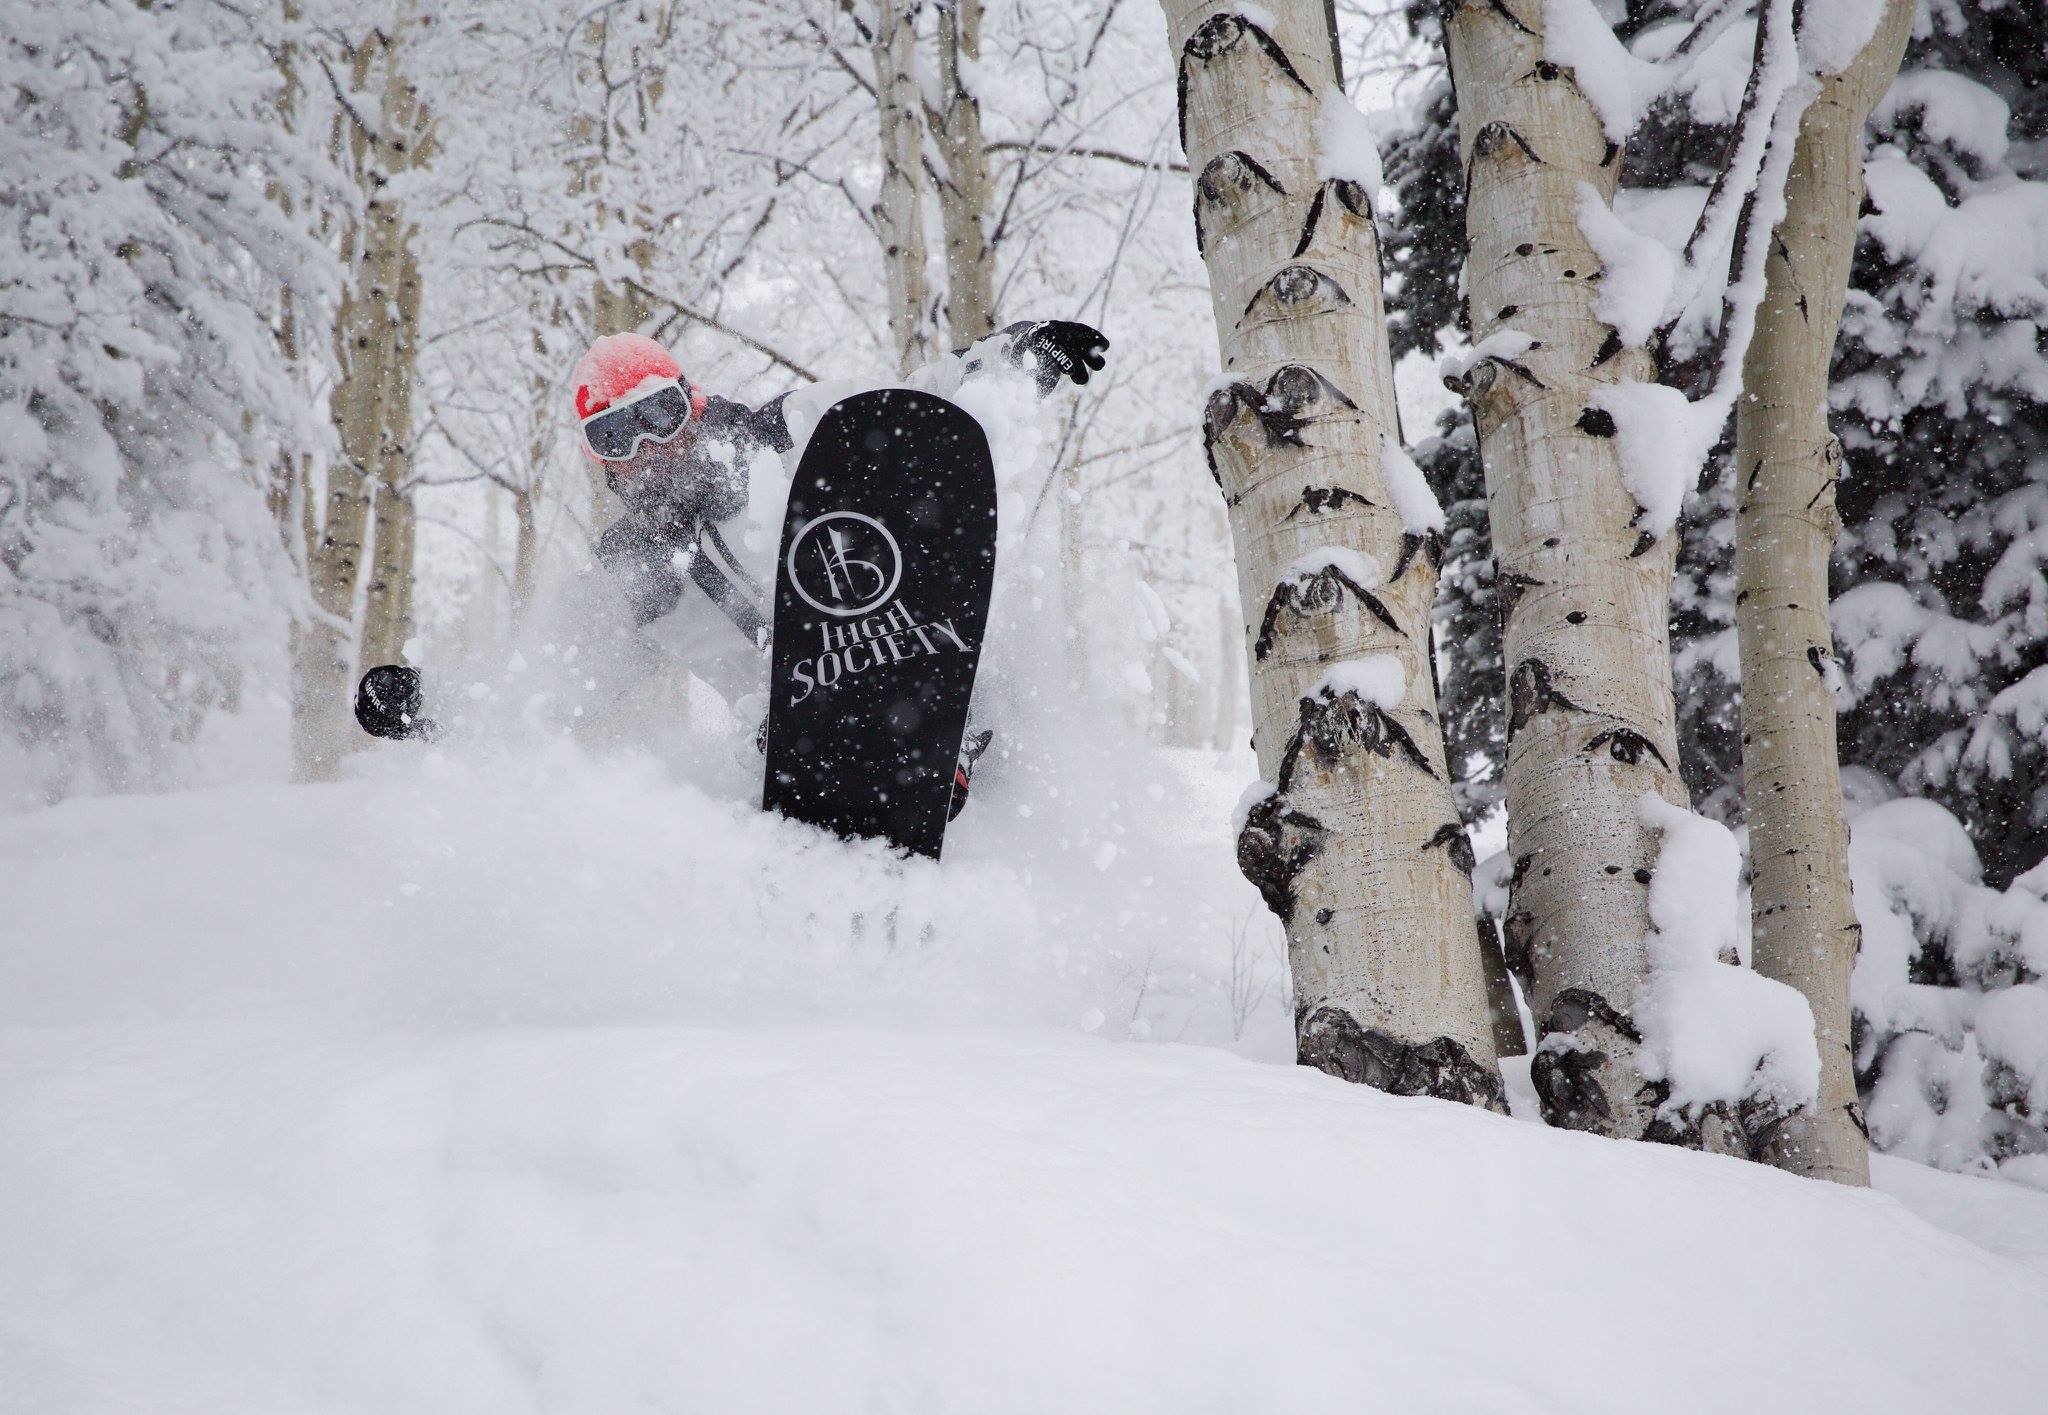 Snowboarder with bright orange helmet making a turn among a grove of aspens in deep powder snow on a High Society snowboard